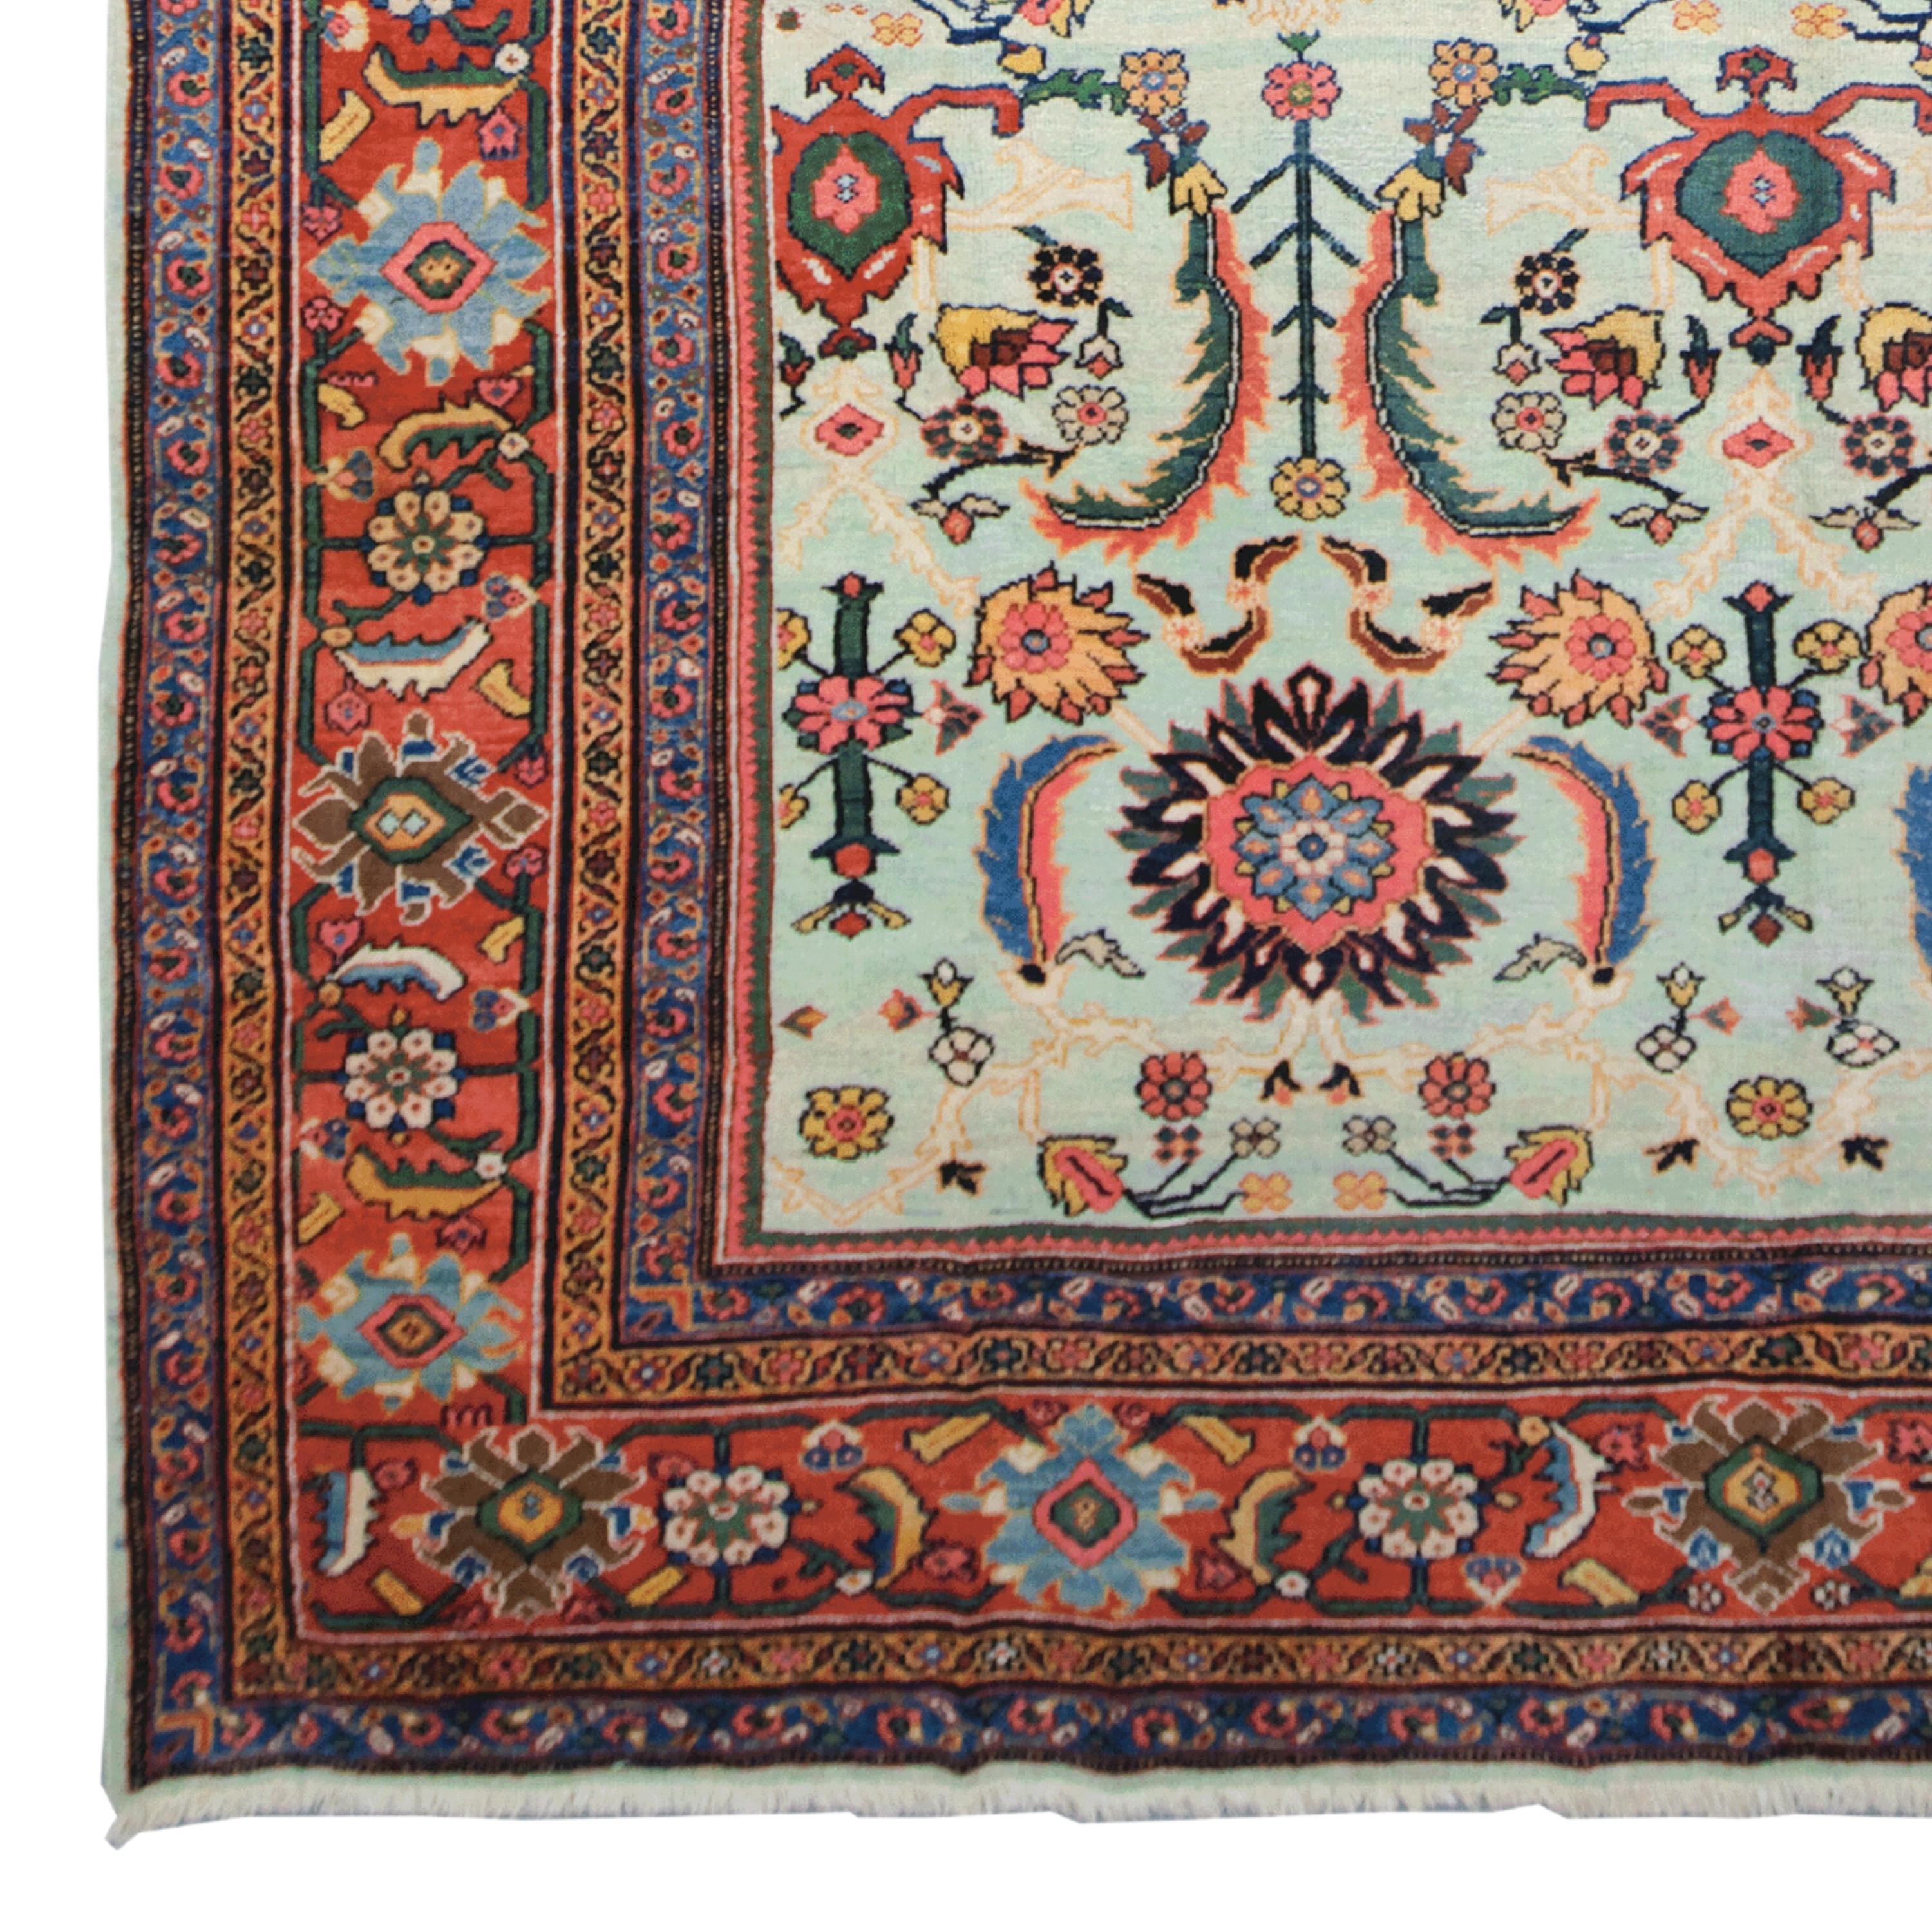 Late of 19th Century Mahal Rug
Size : 310 x 435 cm

This impressive late 19th century Mahal Carpet is a masterpiece reflecting the elegant and sophisticated craftsmanship of a historic period.

Rich Patterns: The carpet is decorated with intricate